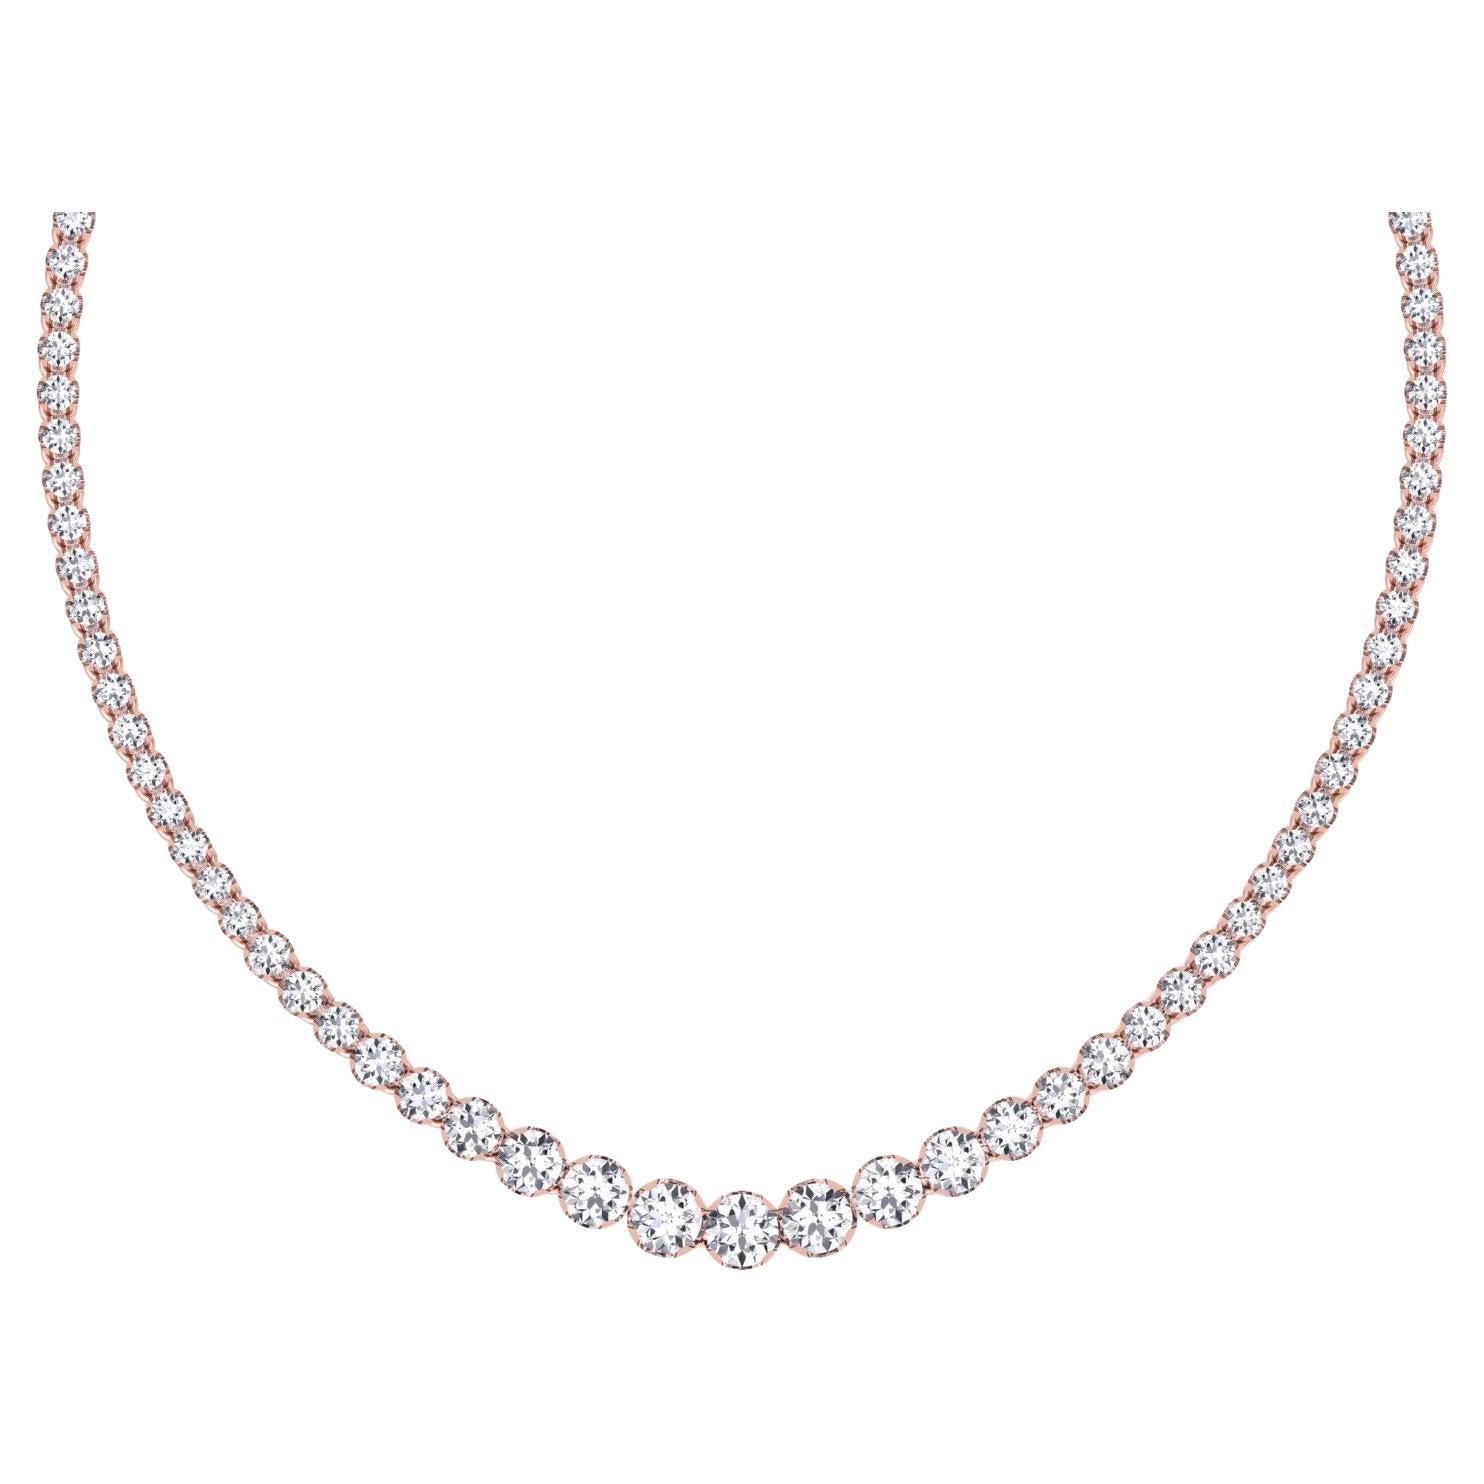 5.30ct Graduated Diamond Tennis Necklace in 14k Rose Gold by Gem Jewelers Co. 